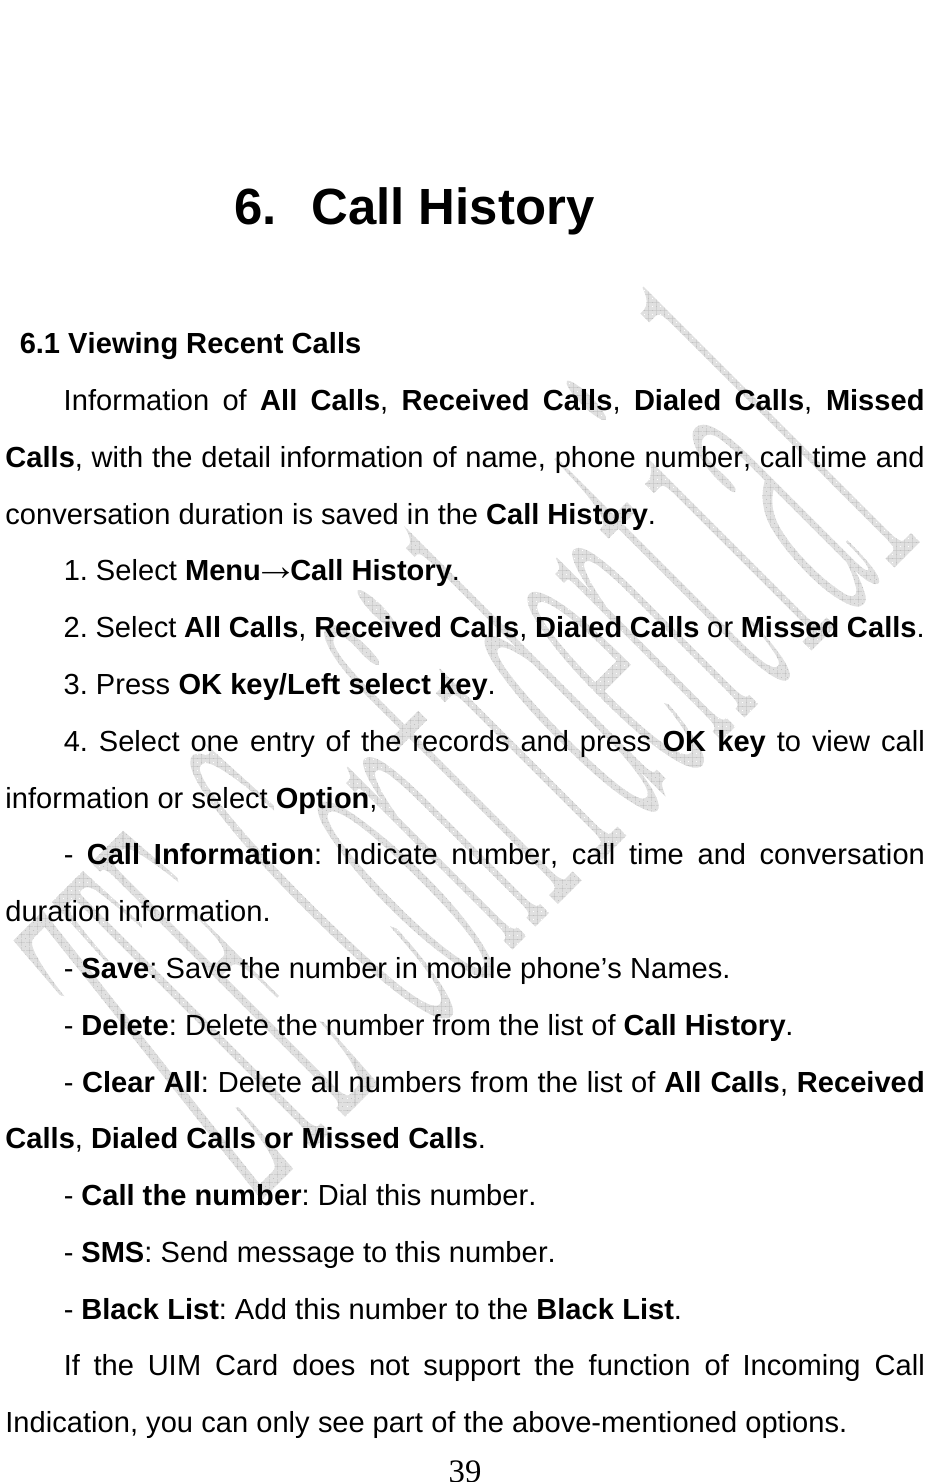                              39 6. Call History 6.1 Viewing Recent Calls Information of All Calls,  Received Calls,  Dialed Calls, Missed Calls, with the detail information of name, phone number, call time and conversation duration is saved in the Call History. 1. Select Menu→Call History. 2. Select All Calls, Received Calls, Dialed Calls or Missed Calls.  3. Press OK key/Left select key. 4. Select one entry of the records and press OK key to view call information or select Option, -  Call Information: Indicate number, call time and conversation duration information.   - Save: Save the number in mobile phone’s Names.   - Delete: Delete the number from the list of Call History. - Clear All: Delete all numbers from the list of All Calls, Received Calls, Dialed Calls or Missed Calls.  - Call the number: Dial this number. - SMS: Send message to this number. - Black List: Add this number to the Black List. If the UIM Card does not support the function of Incoming Call Indication, you can only see part of the above-mentioned options. 